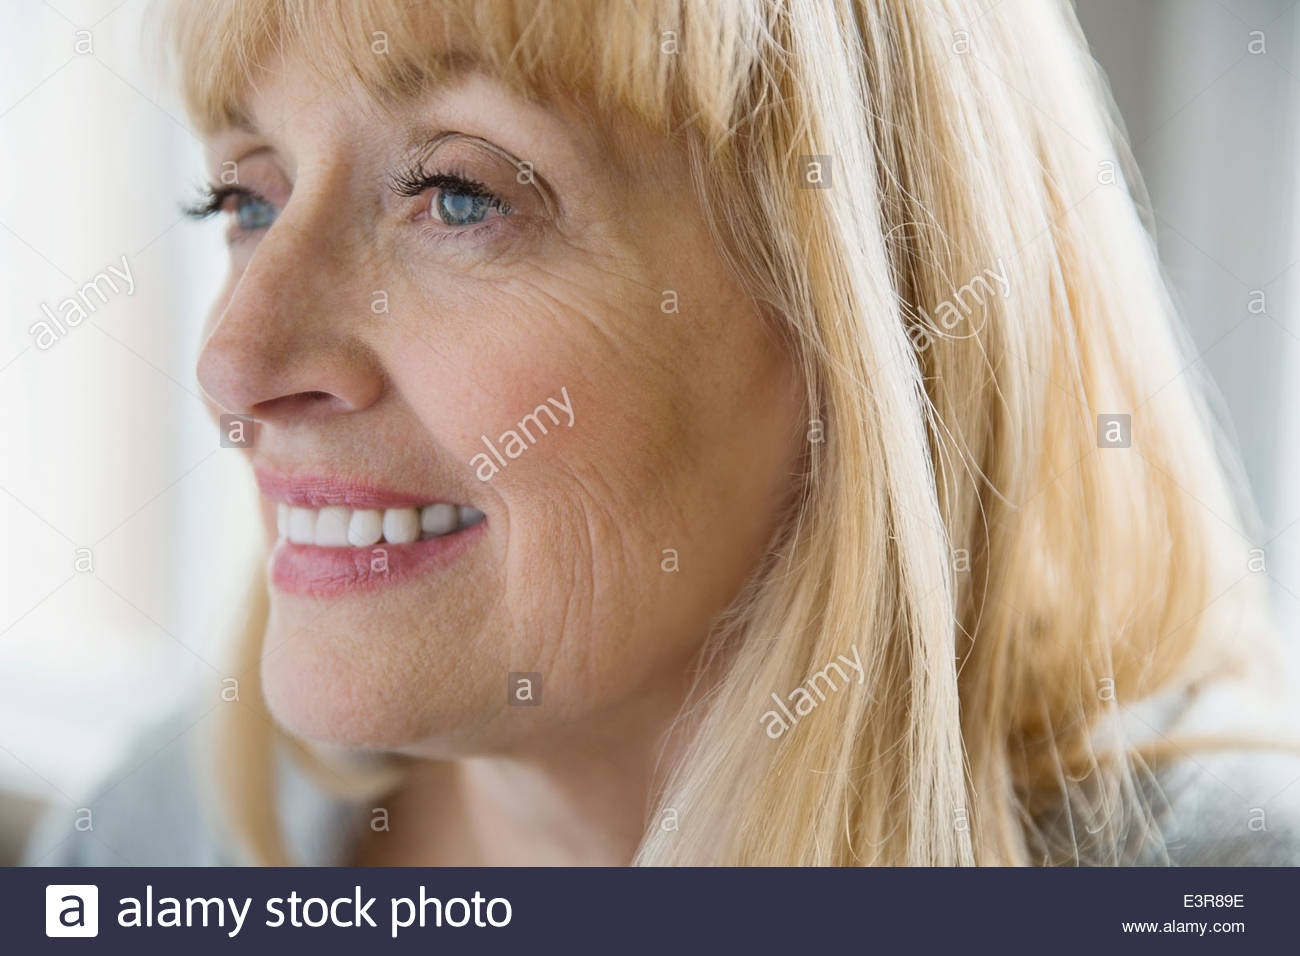 Close up of smiling woman Stock Photo